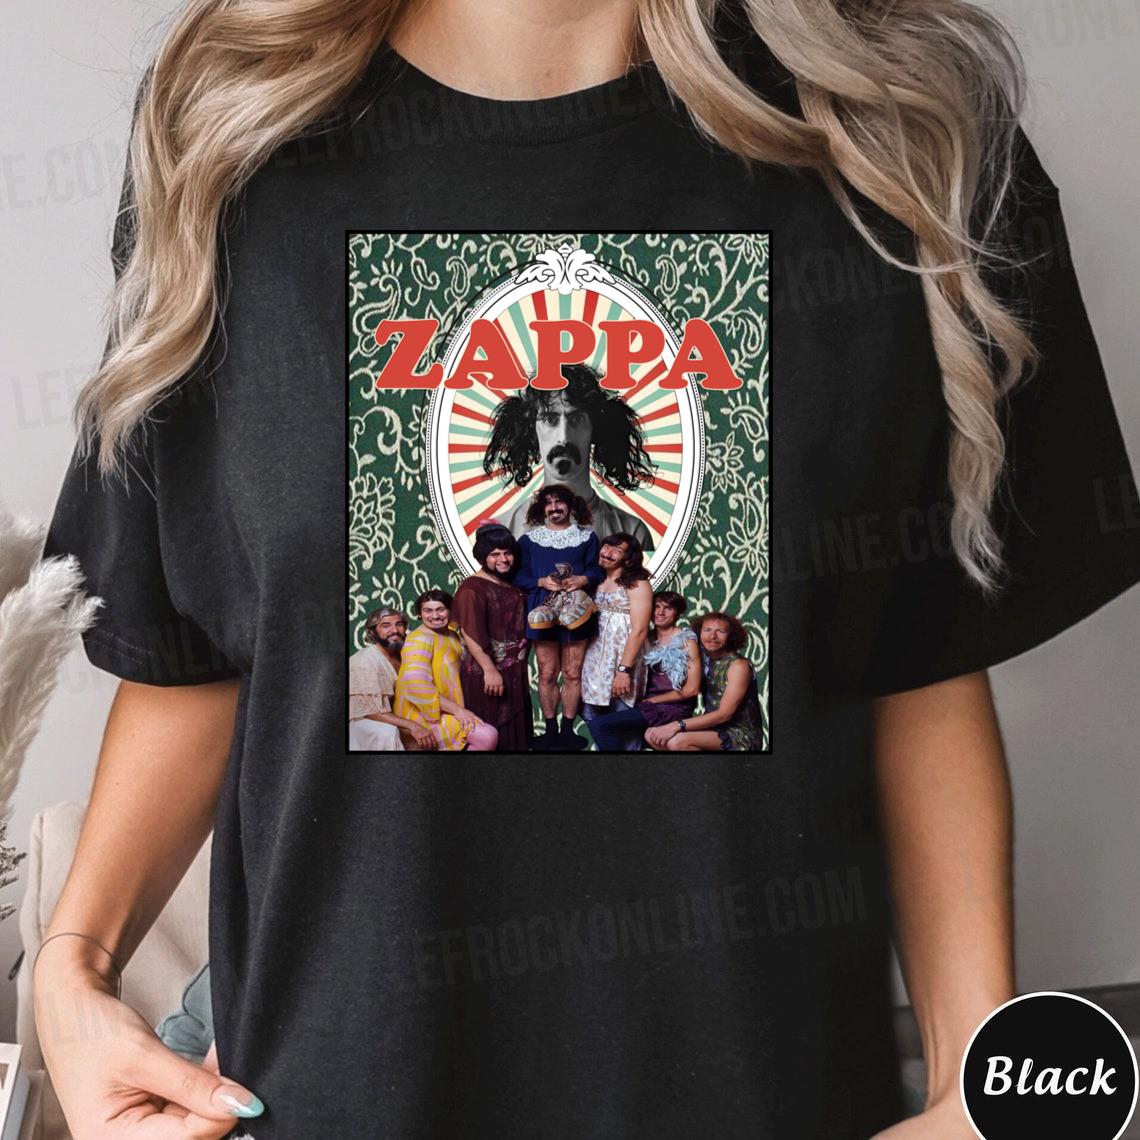 Zappa Mothers Of Invention Frank Zappa T Shirt